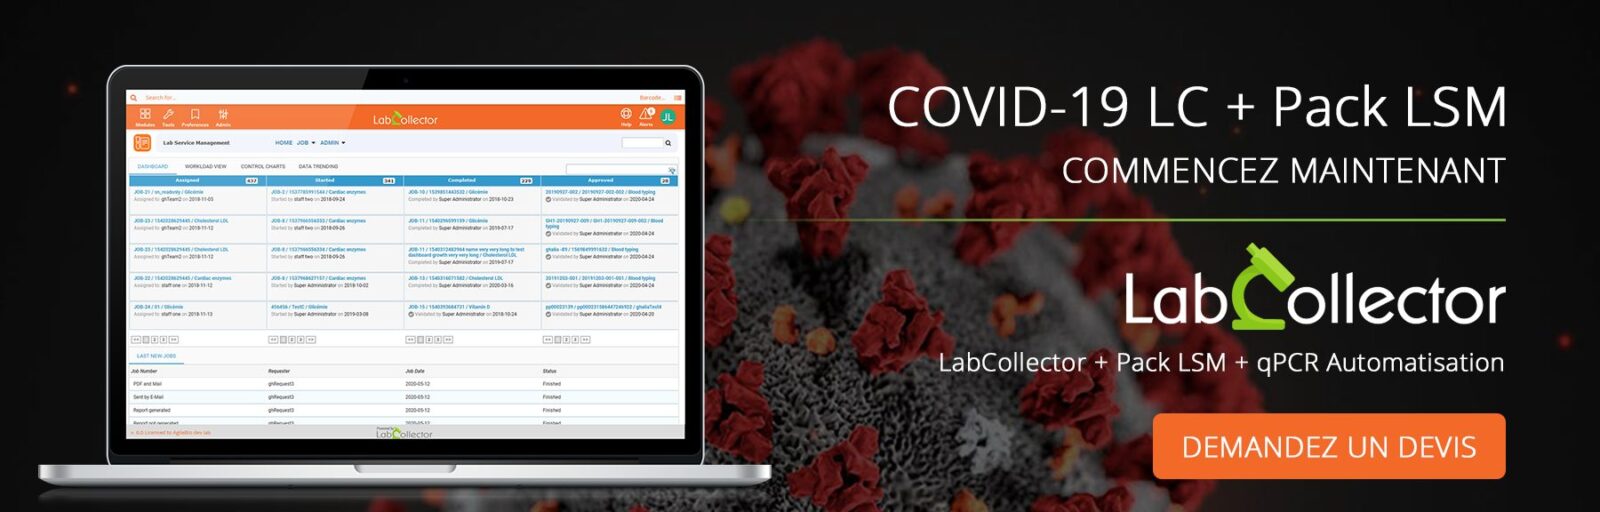 covid19-labcollector-lims-hero